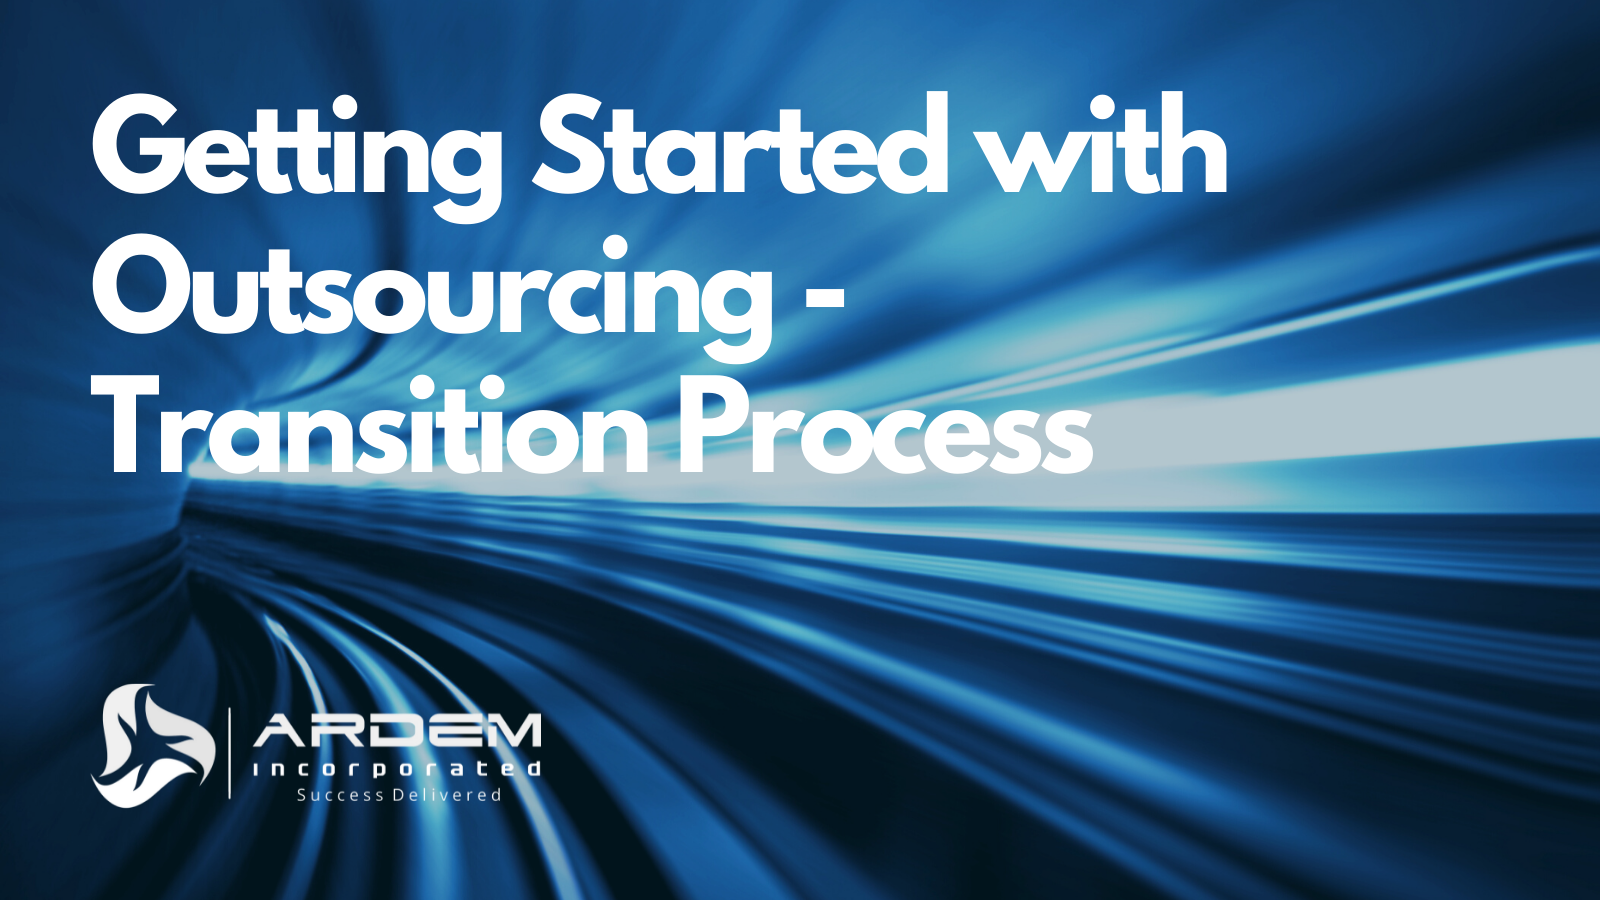 Outsourcing Transition Process